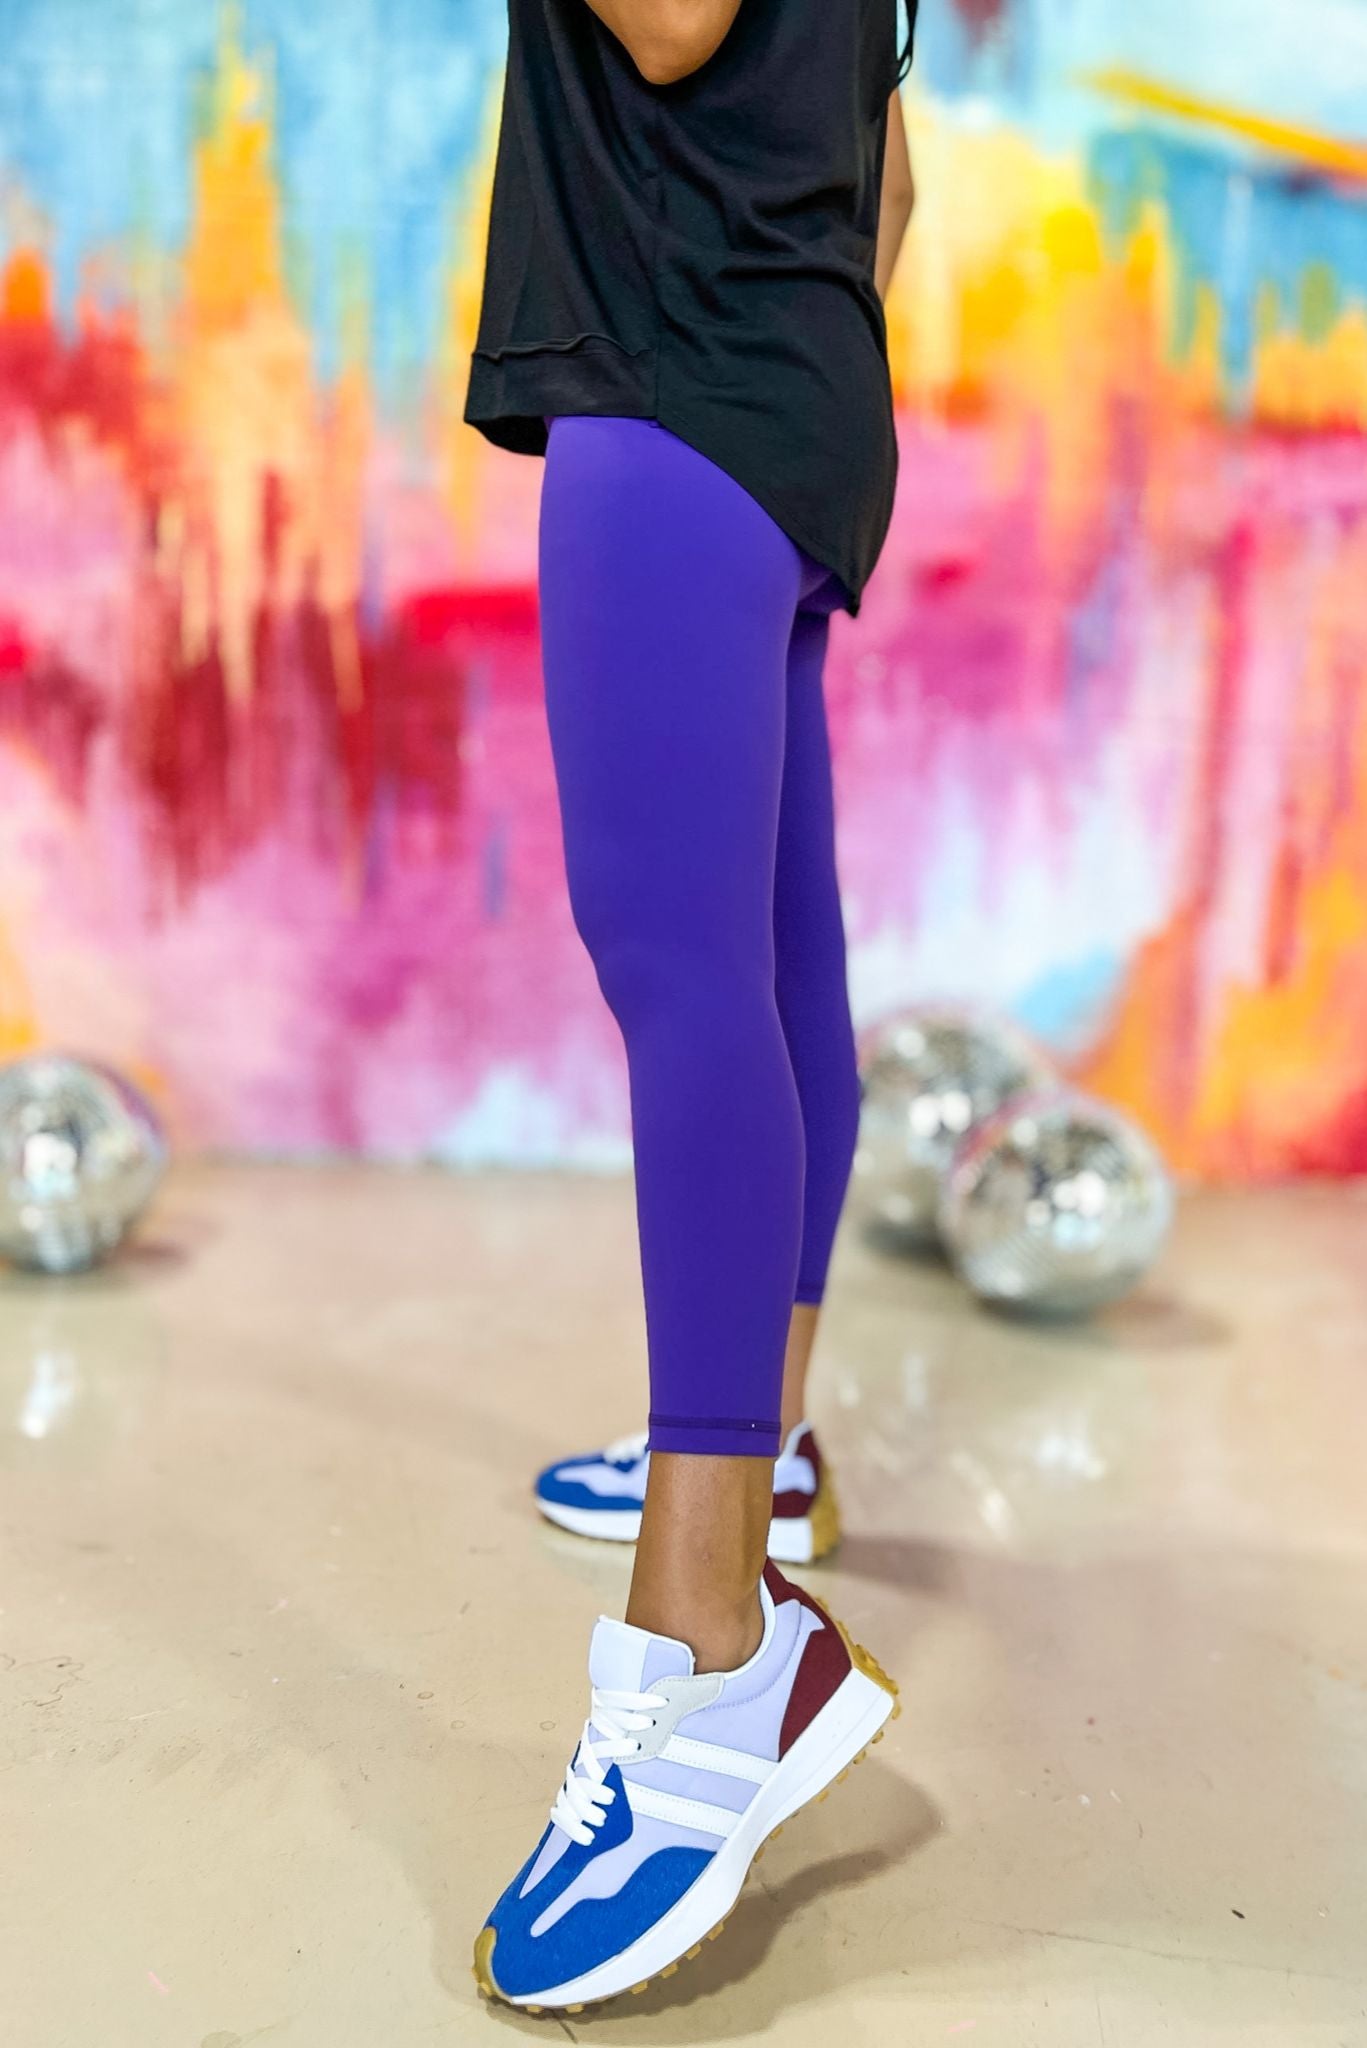 Load image into Gallery viewer, Purple High Waist Form Fit Leggings, compression, pop of color, updated athleisure, transitional piece, every day wear, mom style, shop style your senses by mallory fitzsimmons
